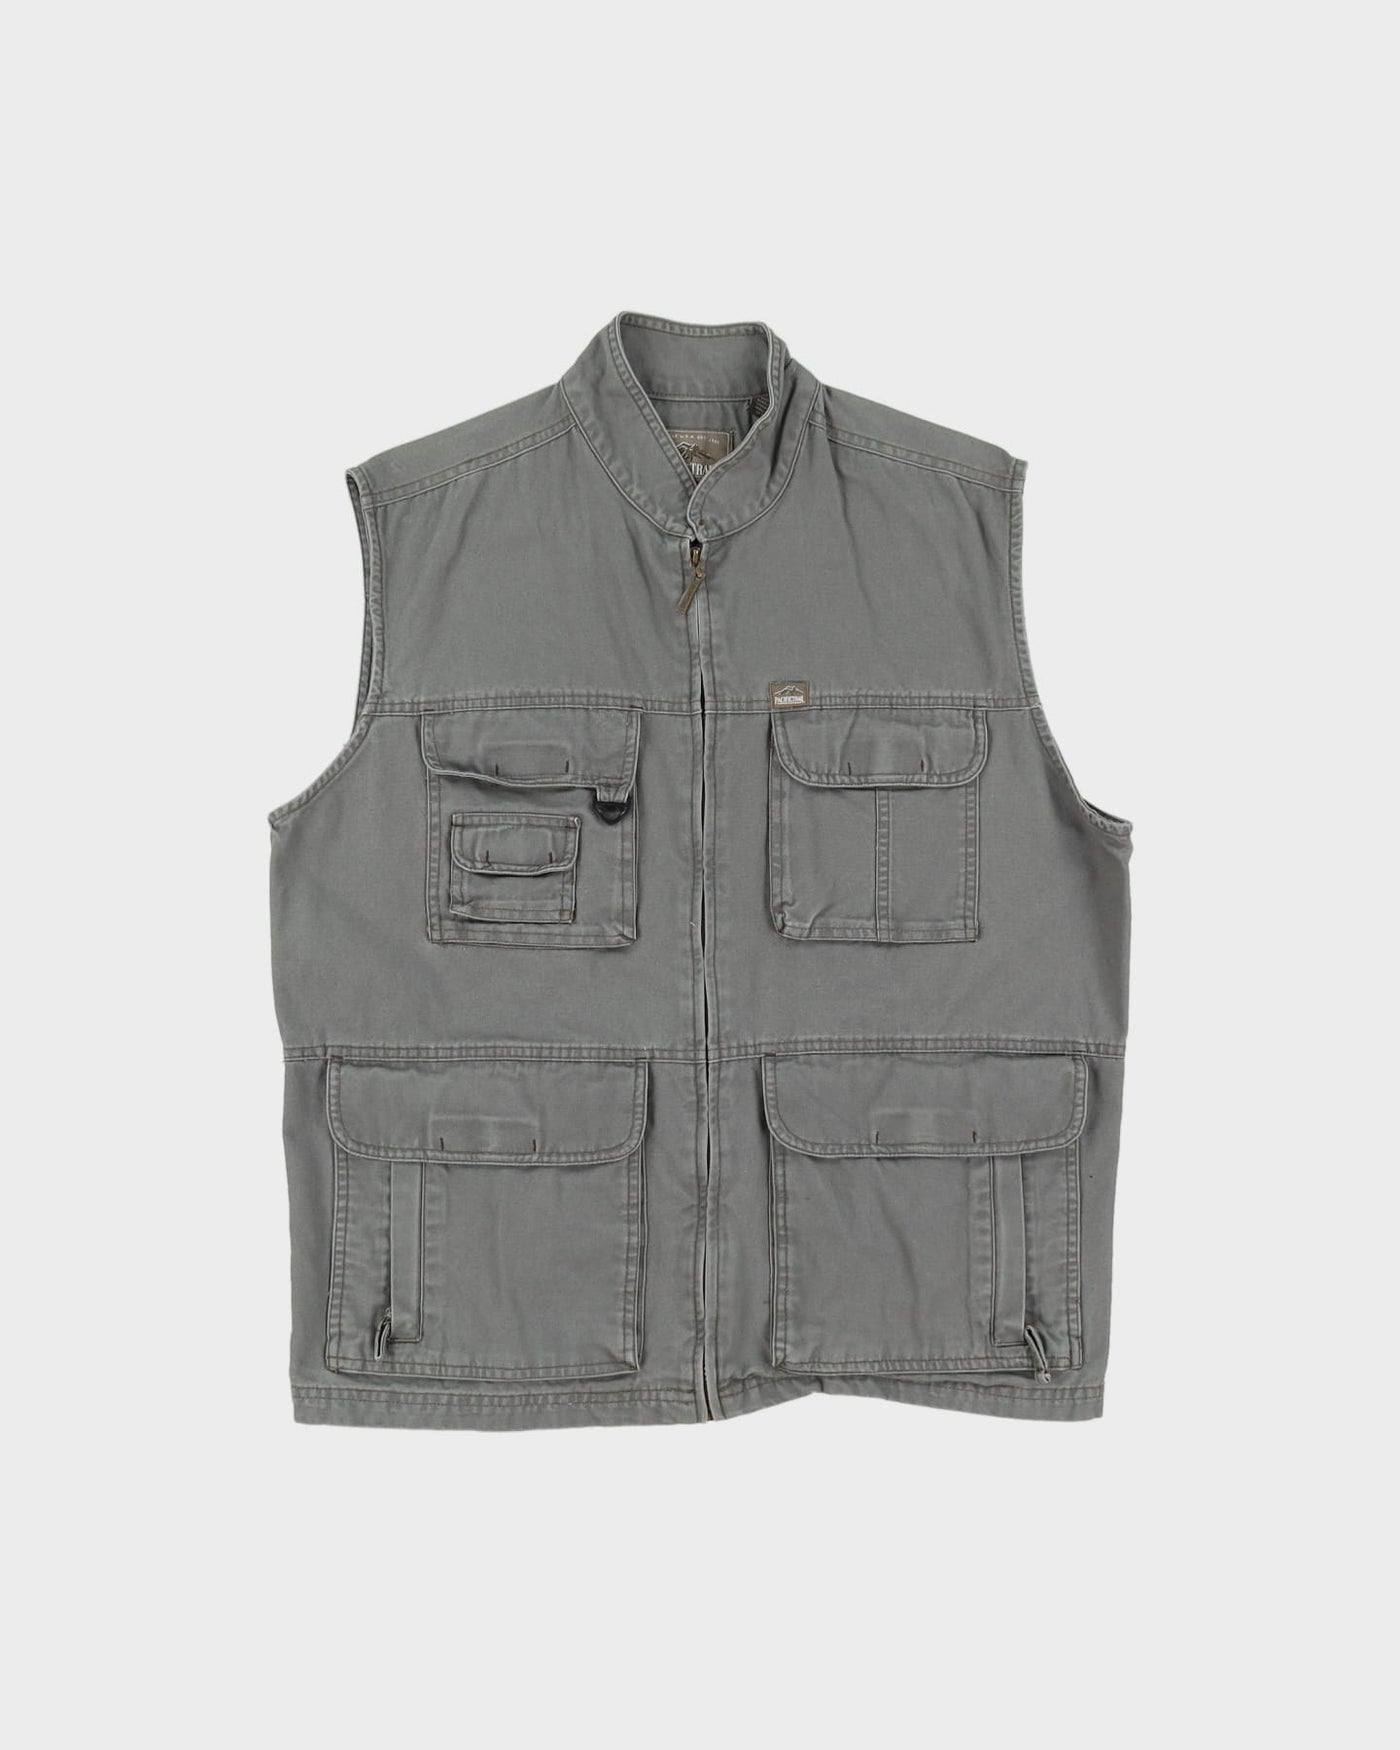 Vintage 90s Pacific Trail Grey Faded Tactical Vest / Oversized Gilet Jacket - L